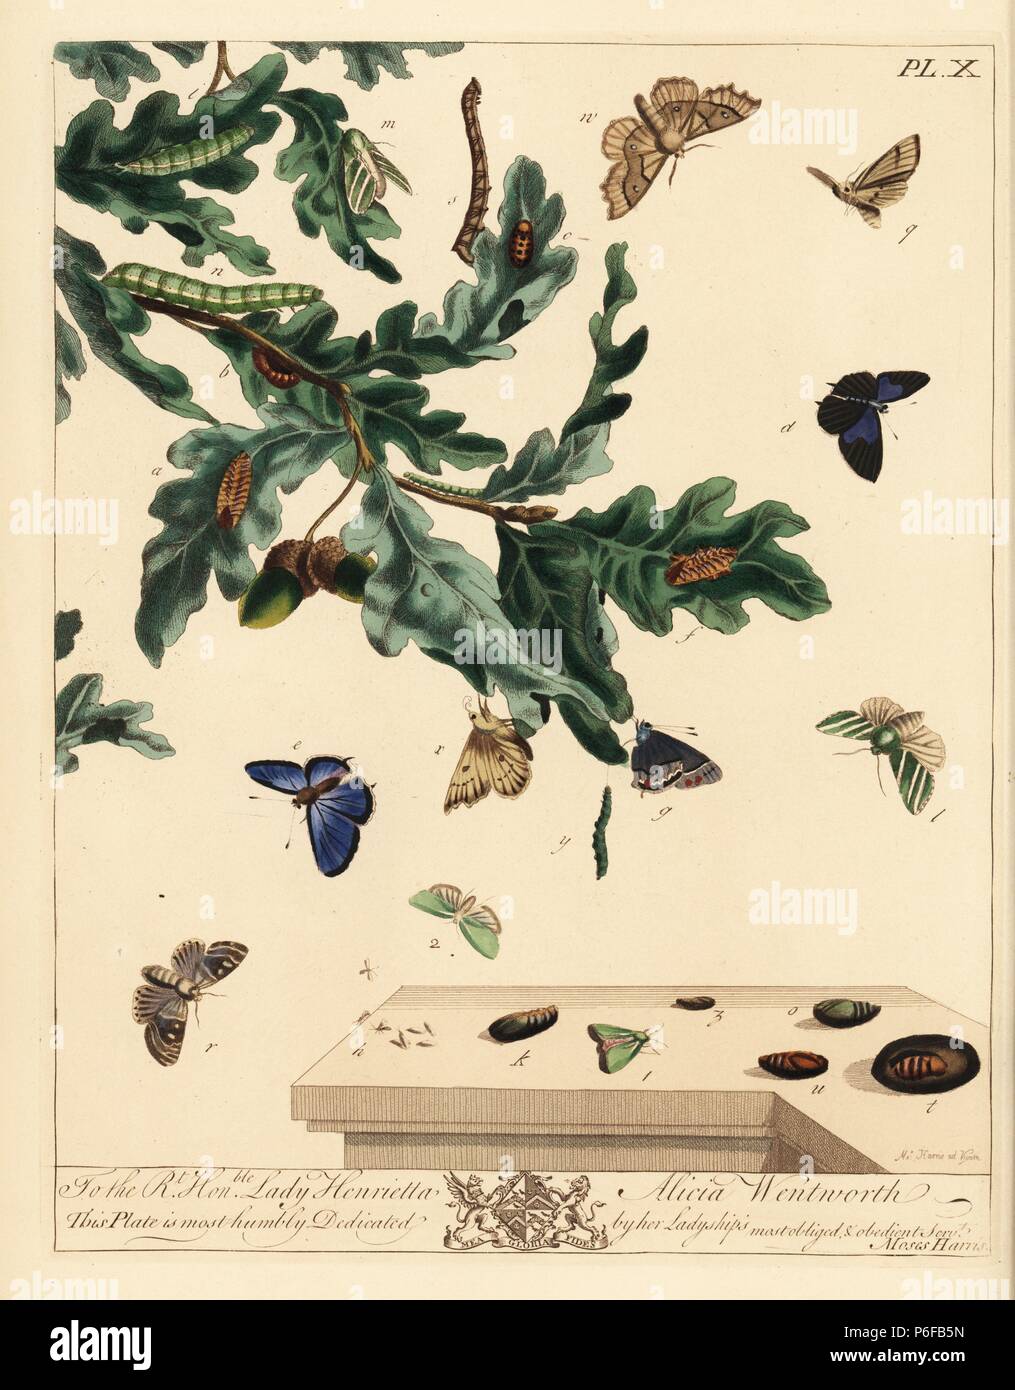 Purple hairstreak butterfly, Neozephyrus quercus, green silver lines moth, Pseudoips prasinana, green oak moth, Tortrix viridana, dun-bar, Cosmia trapezina, and scalloped hazel, Odontopera bidentata. Handcoloured lithograph after an illustration by Moses Harris from 'The Aurelian; a Natural History of English Moths and Butterflies,' new edition edited by J. O. Westwood, published by Henry Bohn, London, 1840. Stock Photo